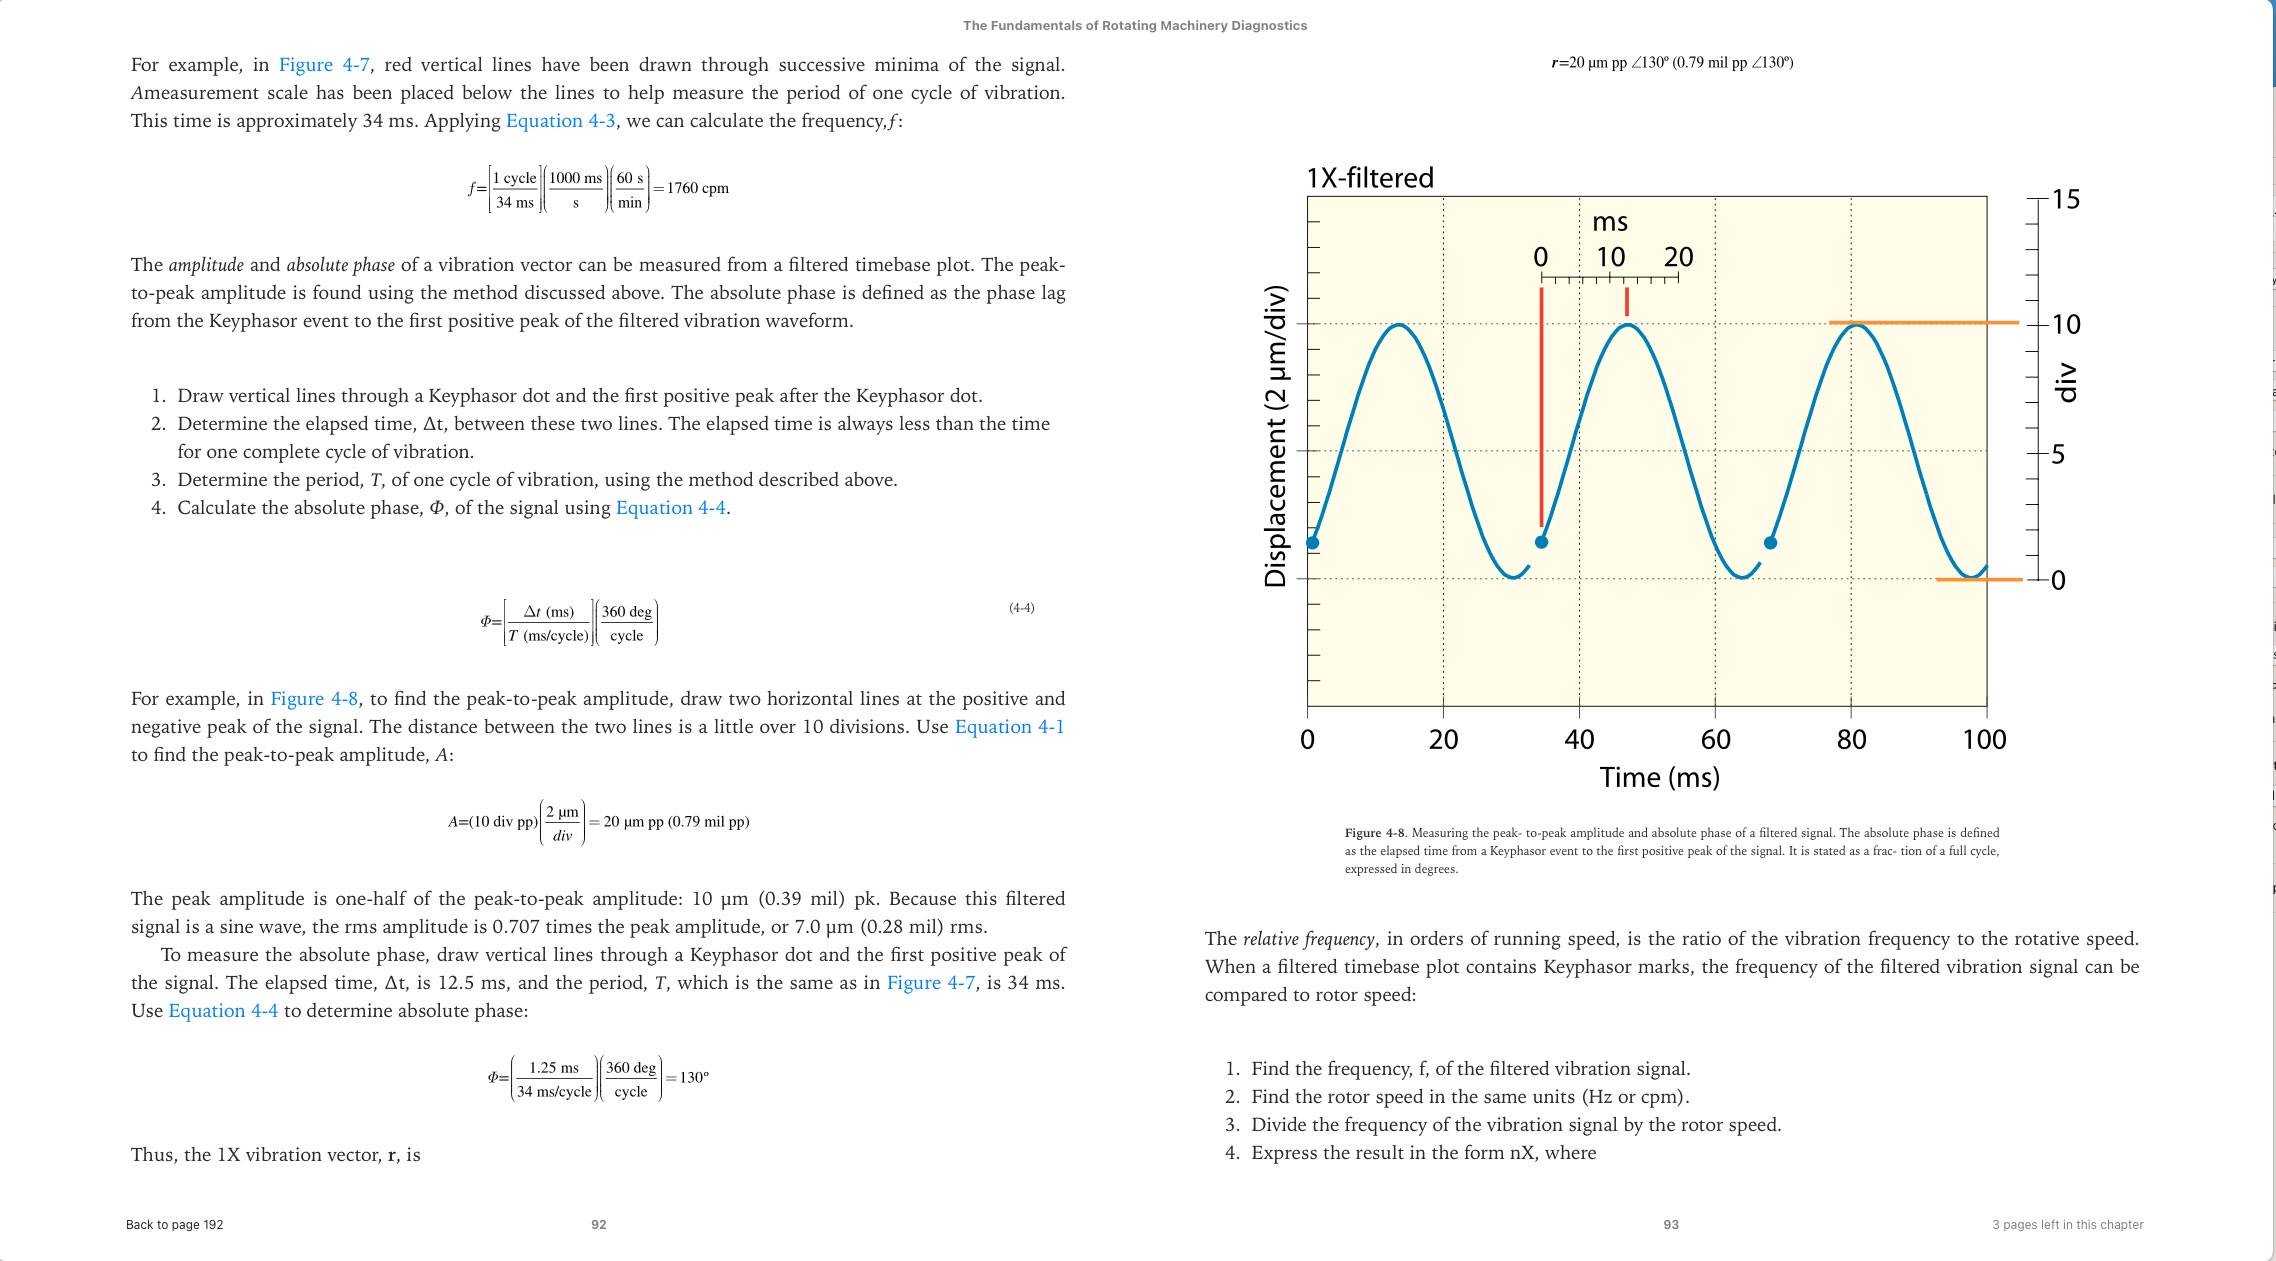 Sample page showing typeset equations, cross-linking, and textbook infographic